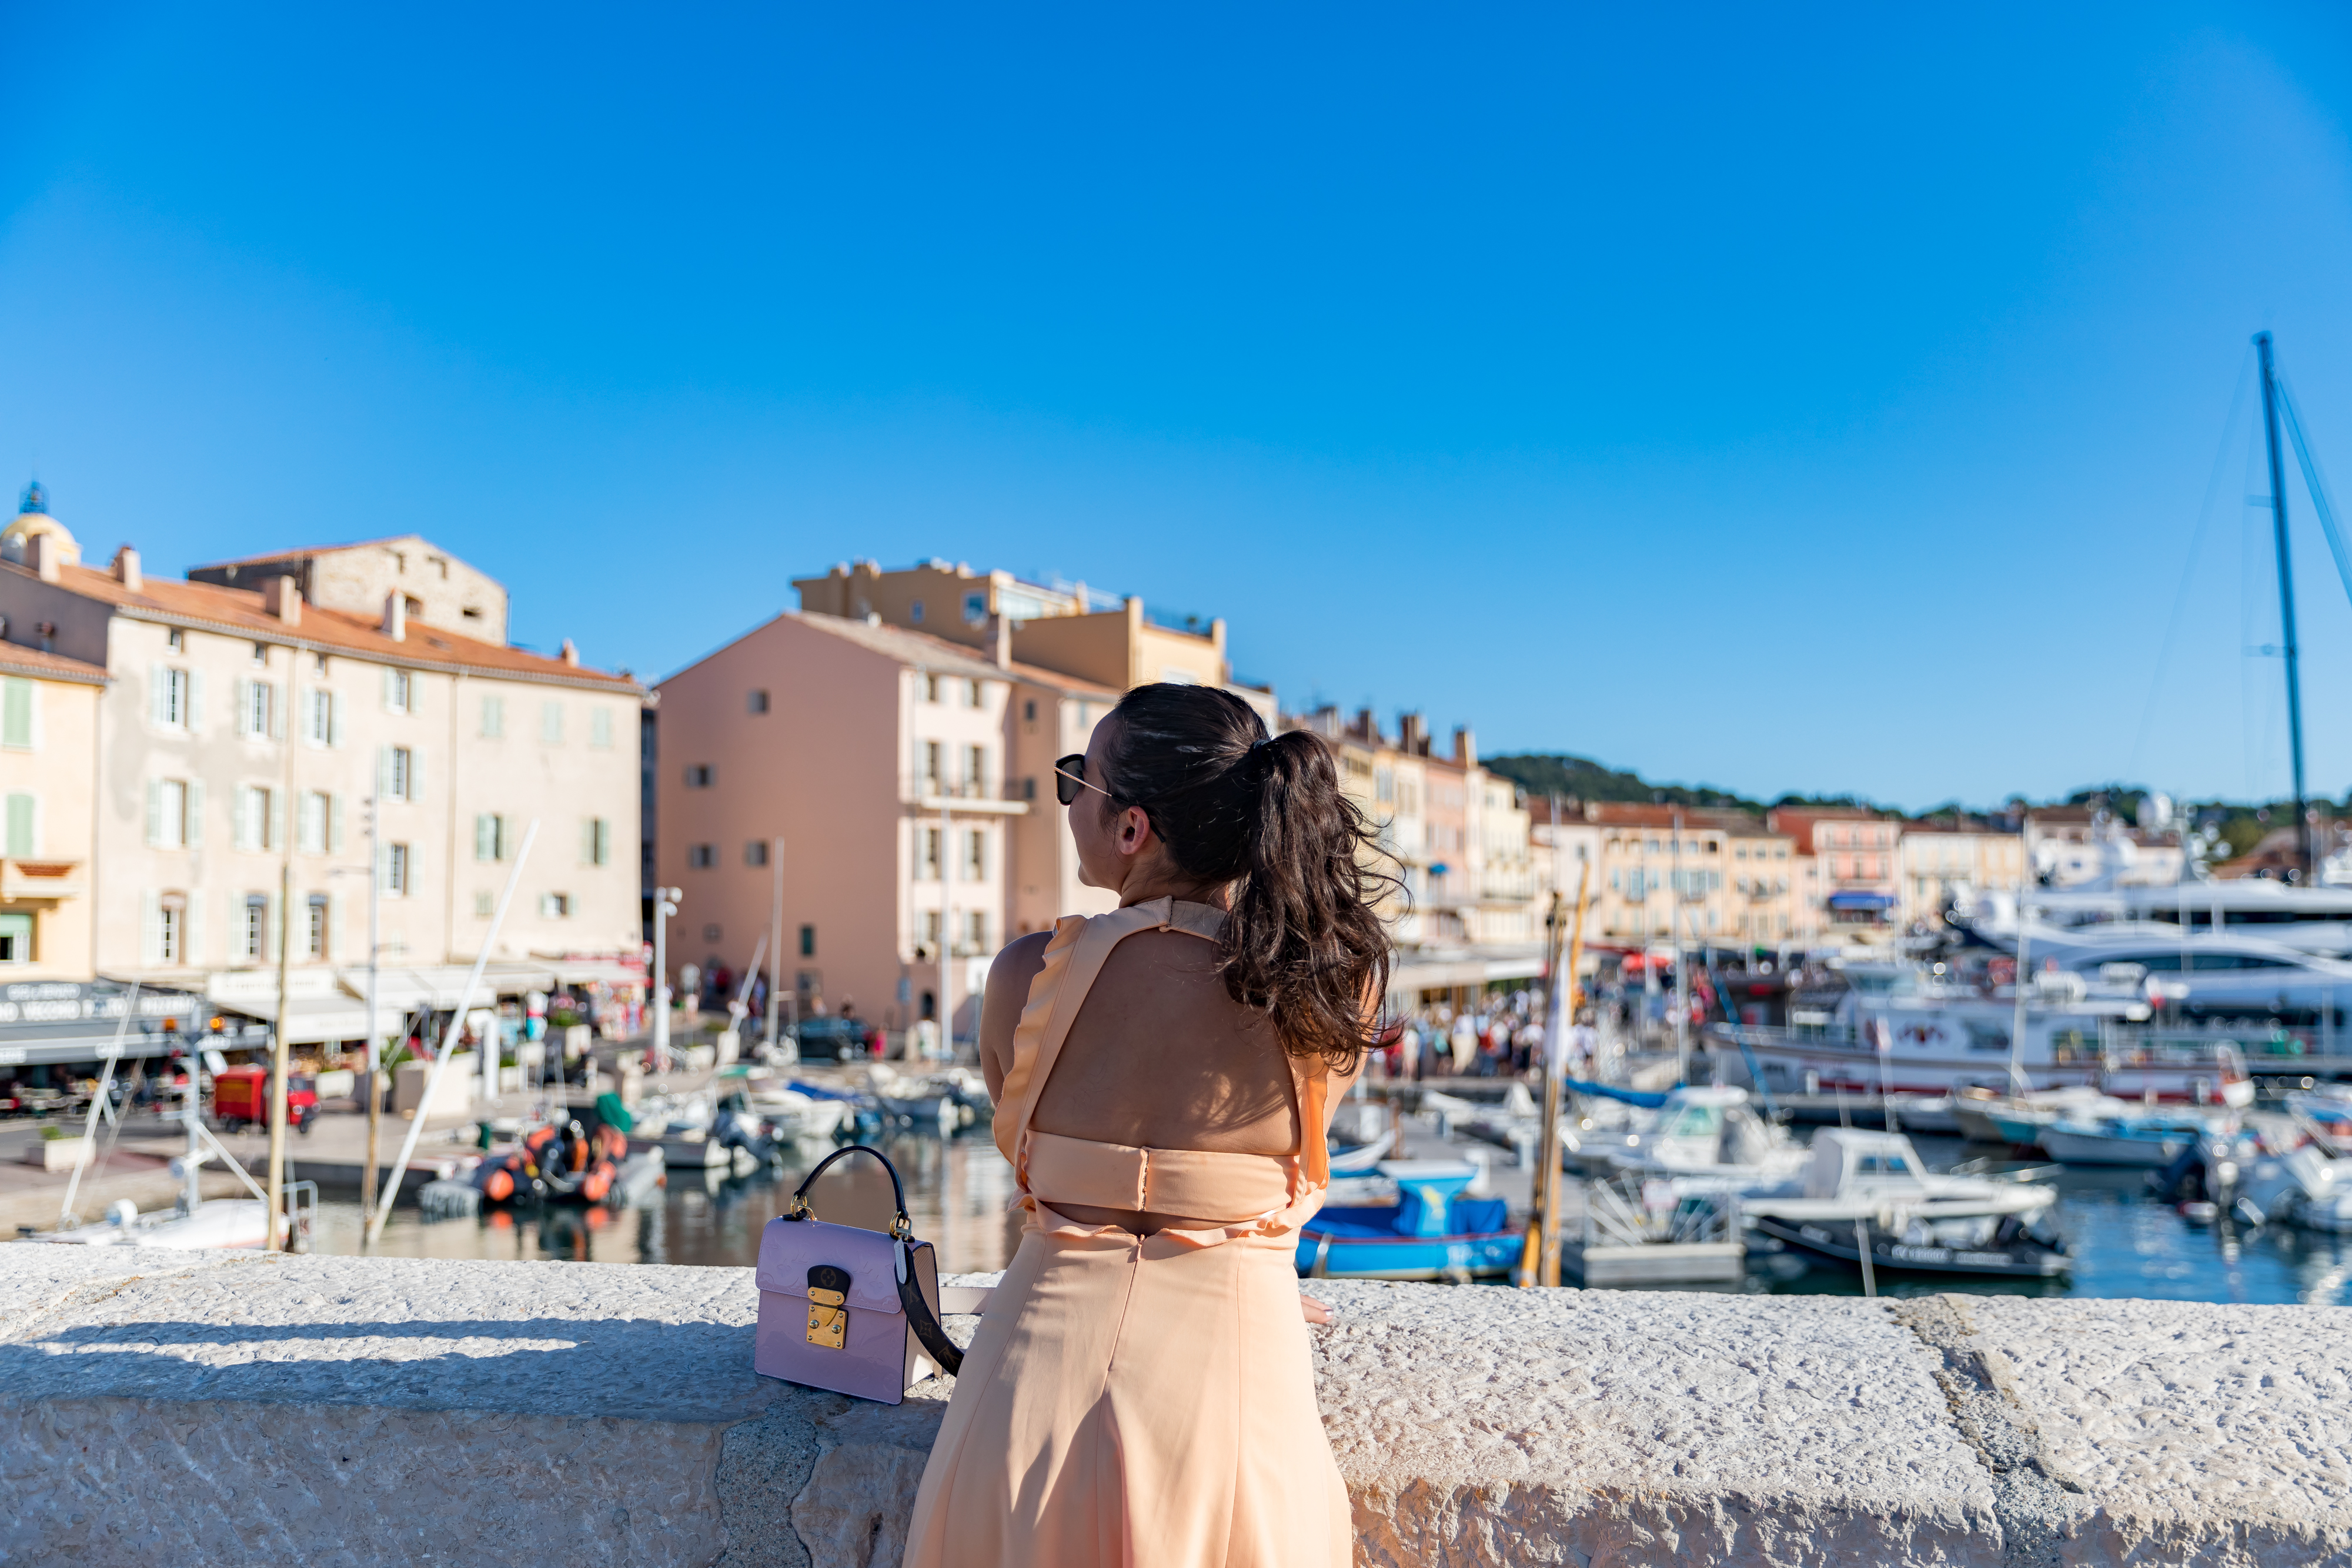 Our Complete Guide to St. Tropez